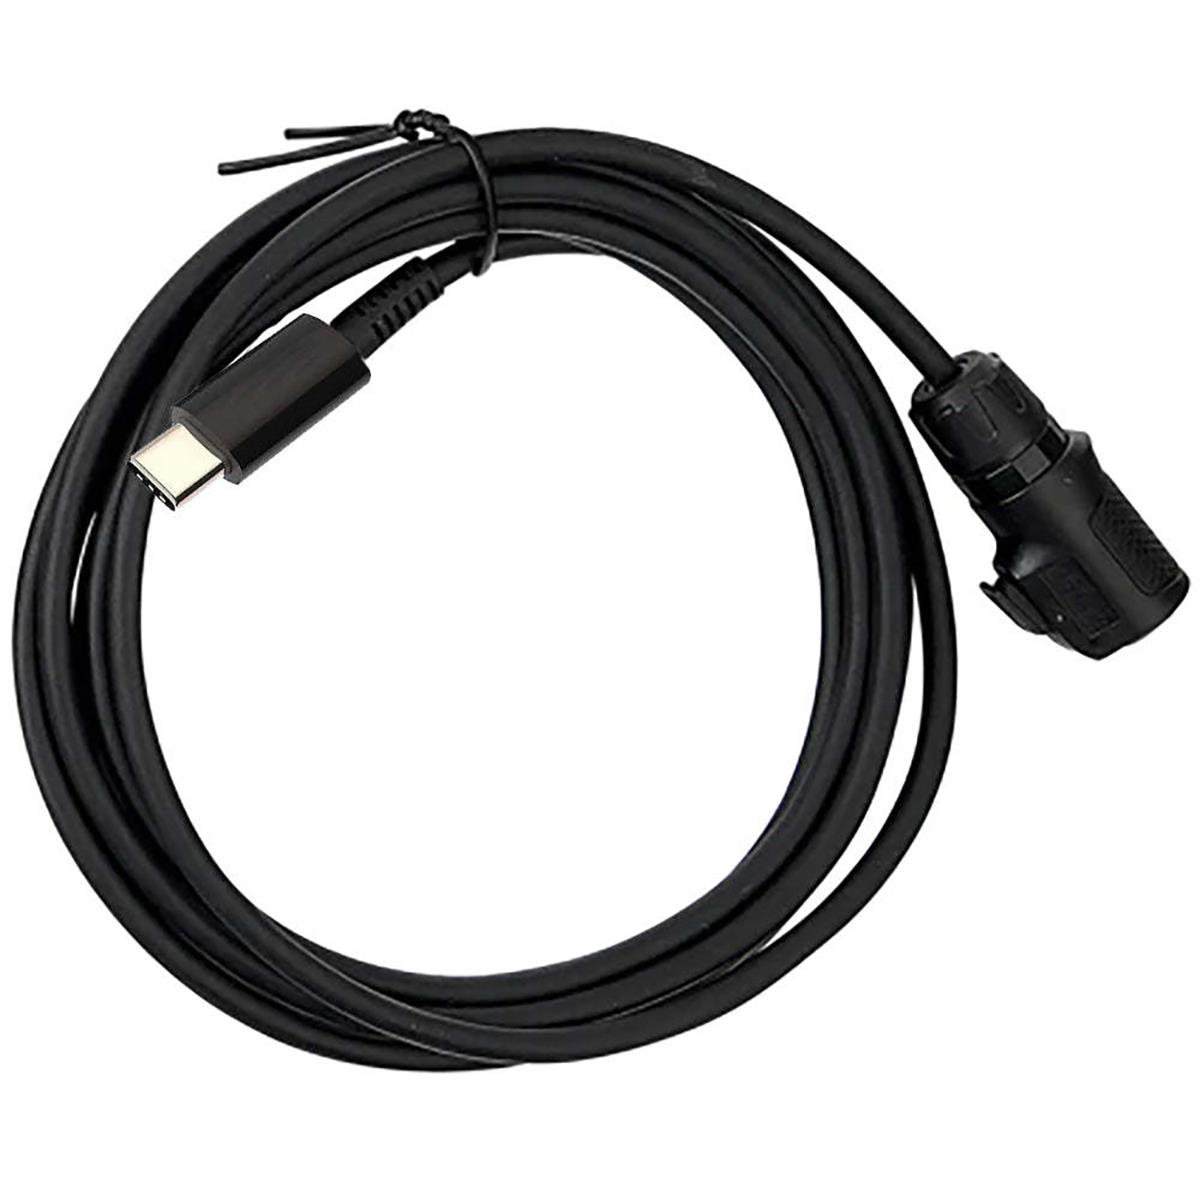 Image of SiOnyx 10' USB-C Power Cable for Nightwave Navigation Camera